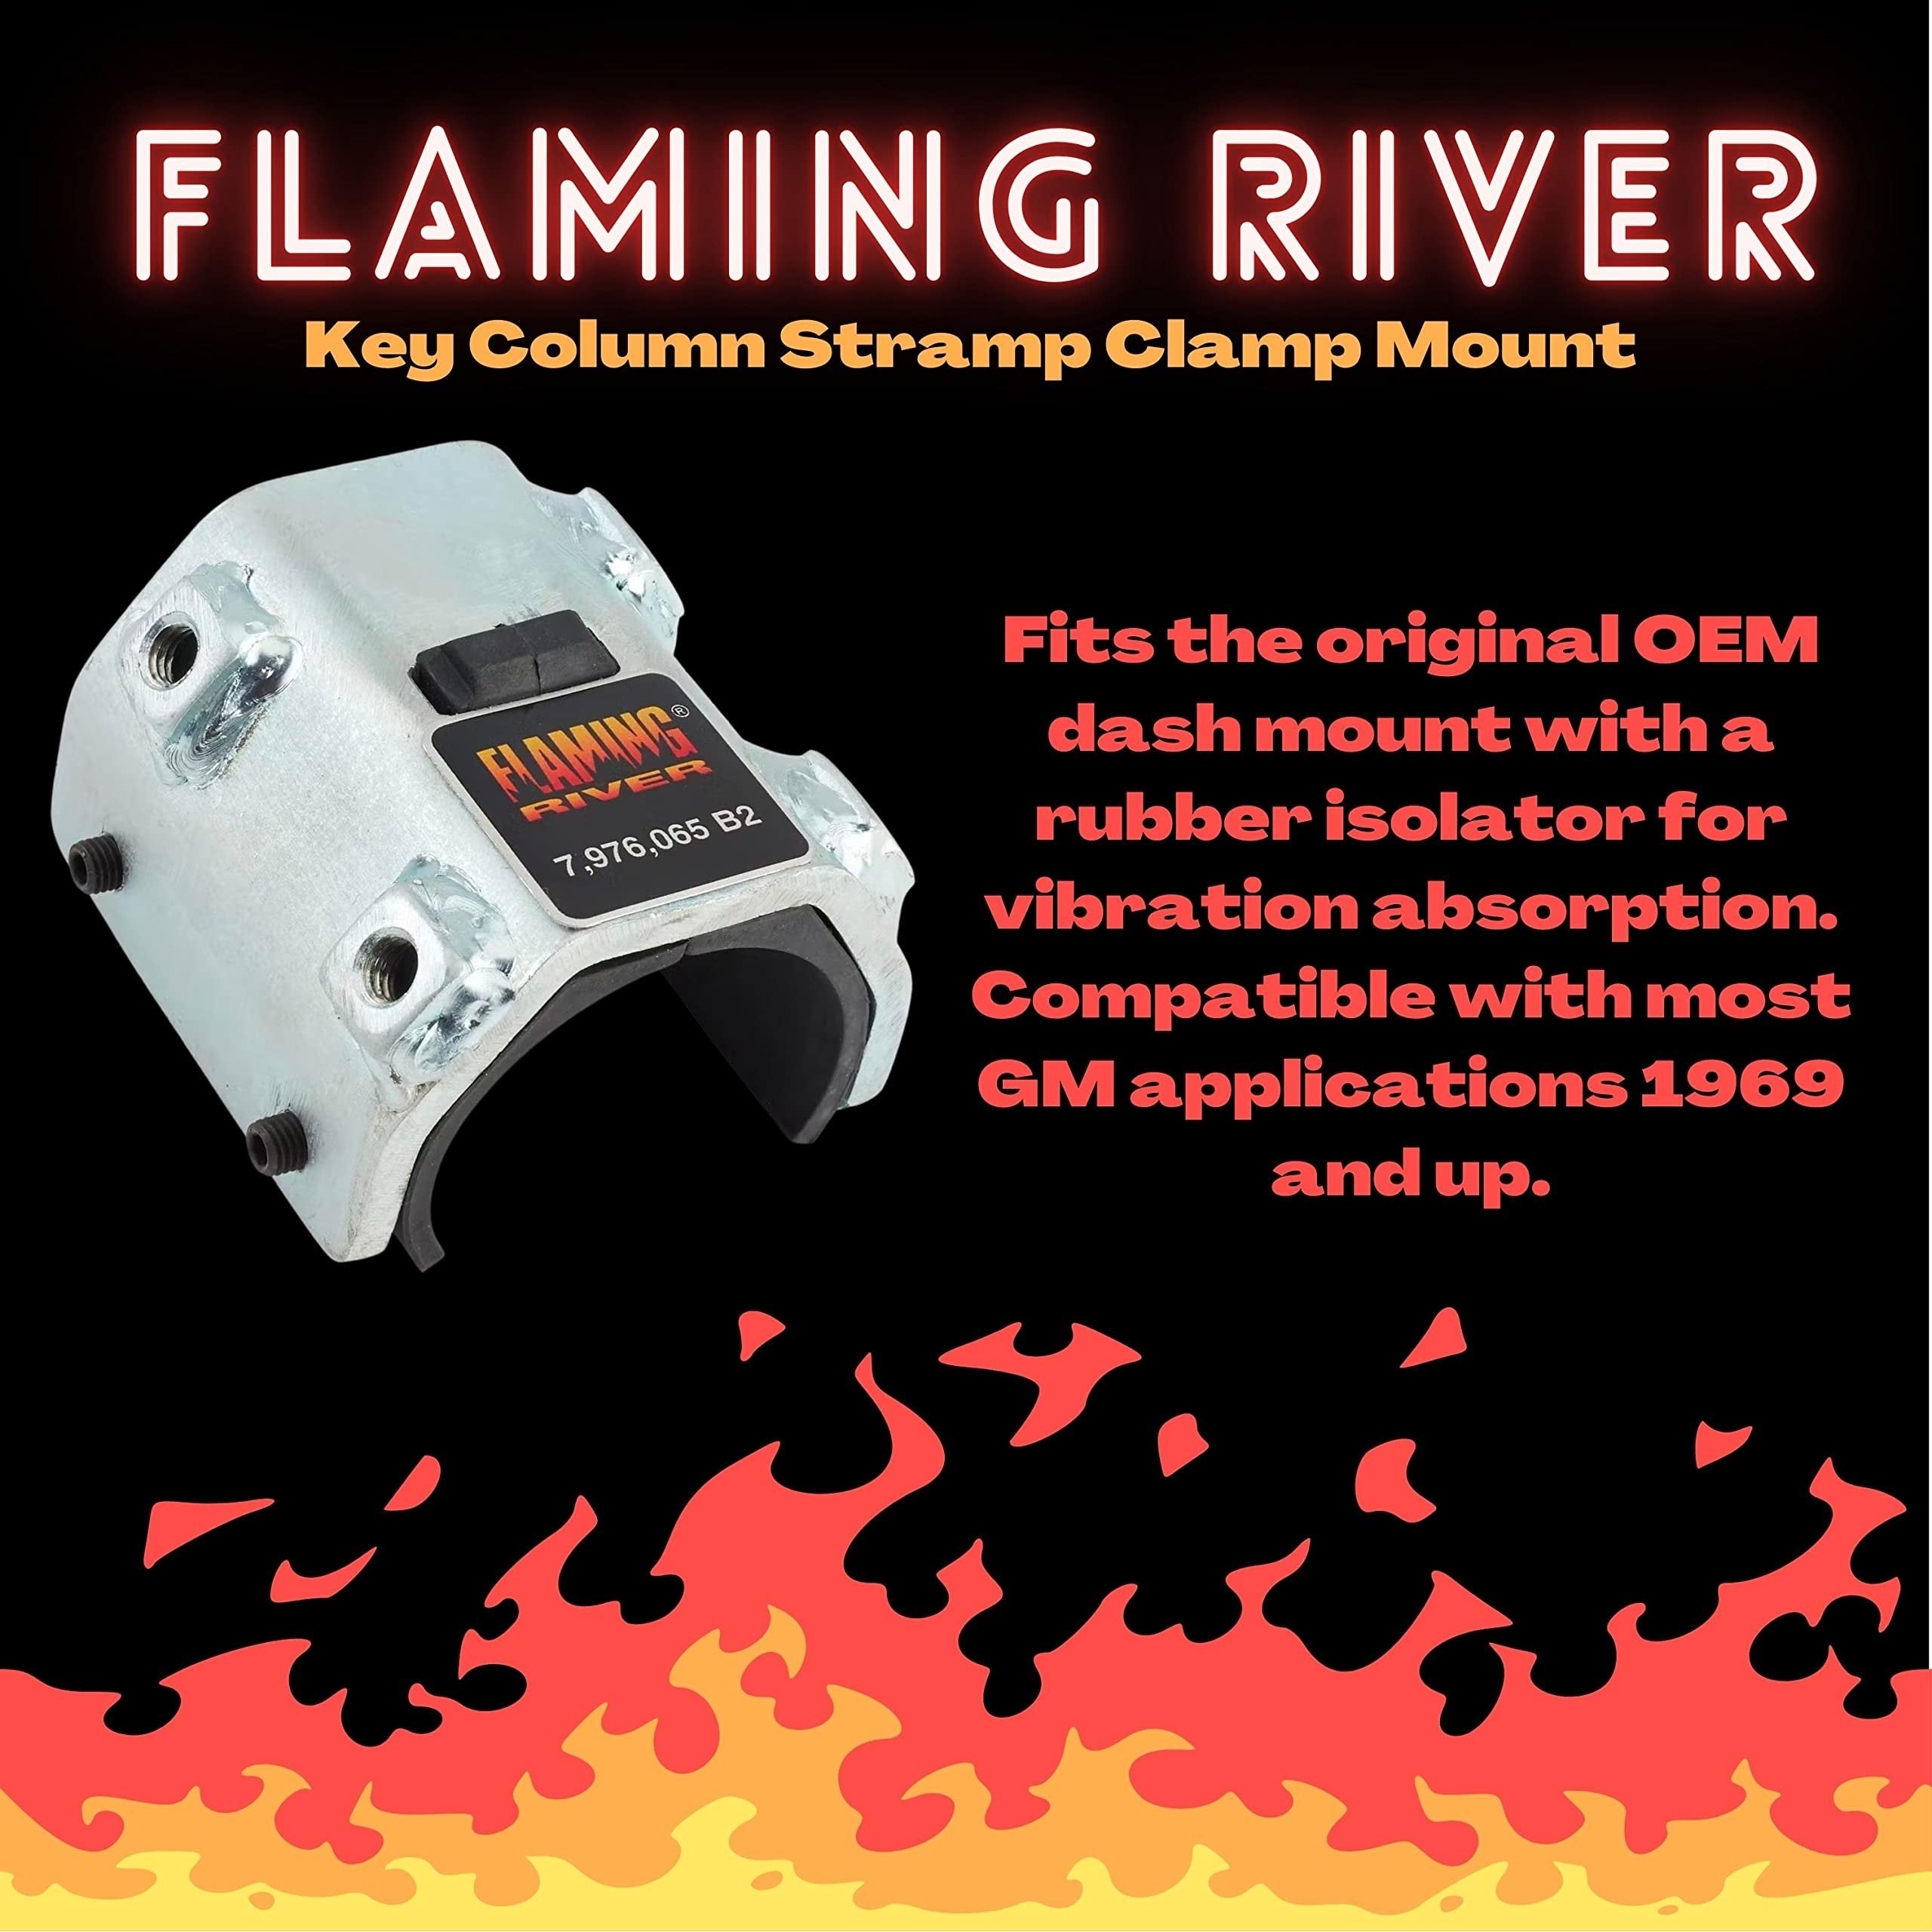 Flaming River Column Strap Clamp Mount with Rubber Isolator - Car Part FR20300 - American Made Steering Wheel Automotive Clamp - 2 Inch Diameter Column Tube with Bonus Keychain